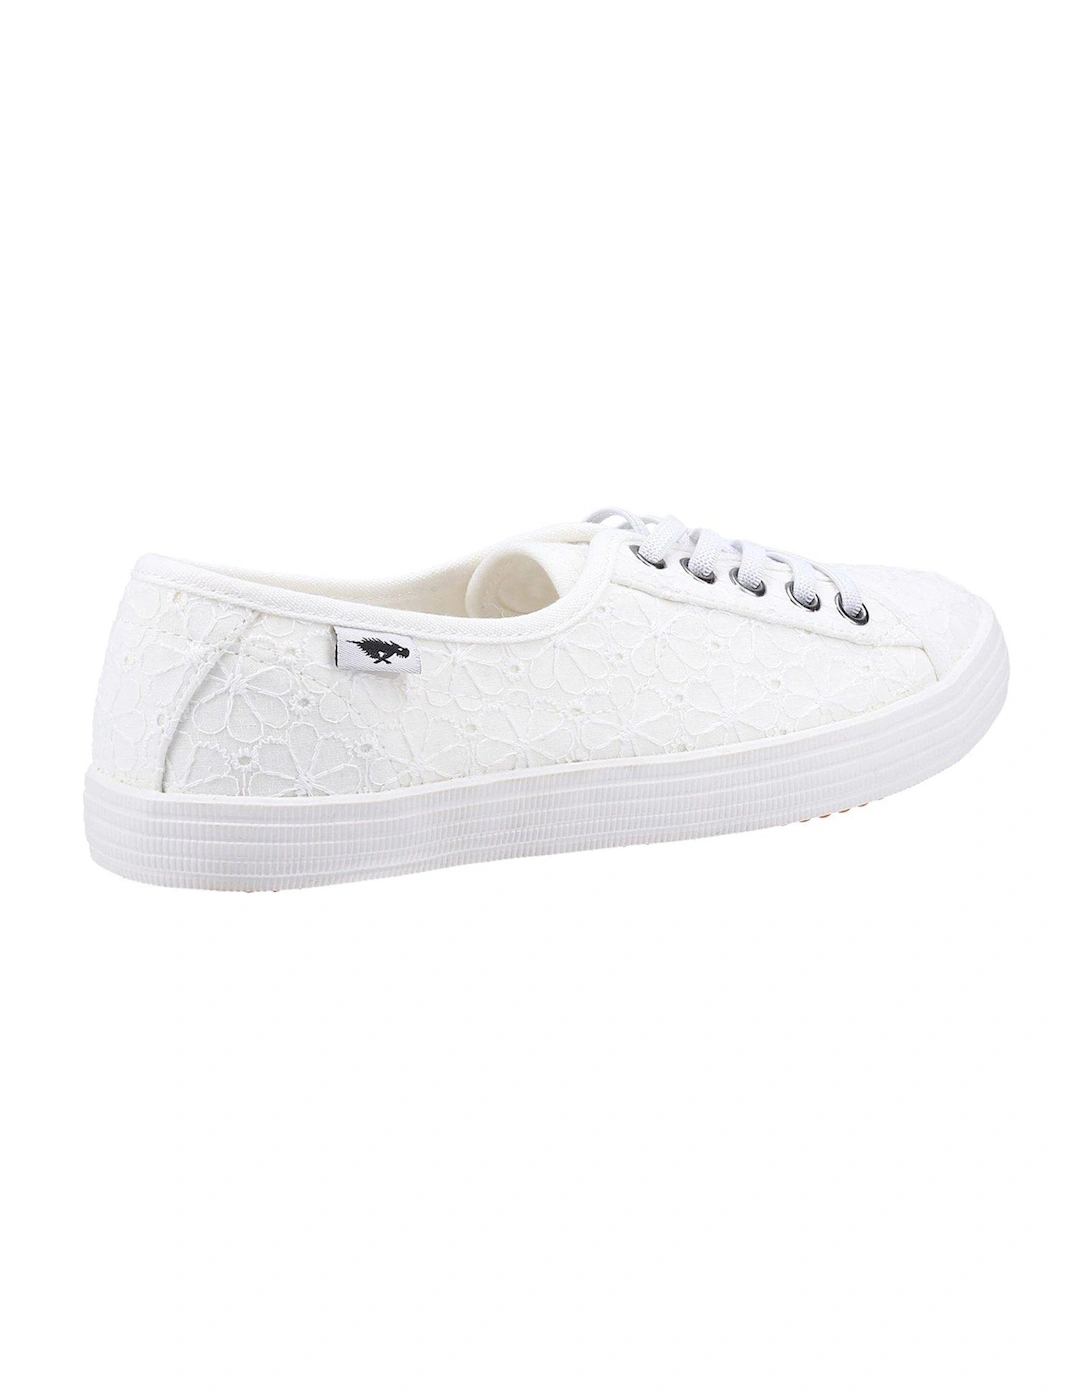 Chow Chow Summer Jersey Plimsolls - White